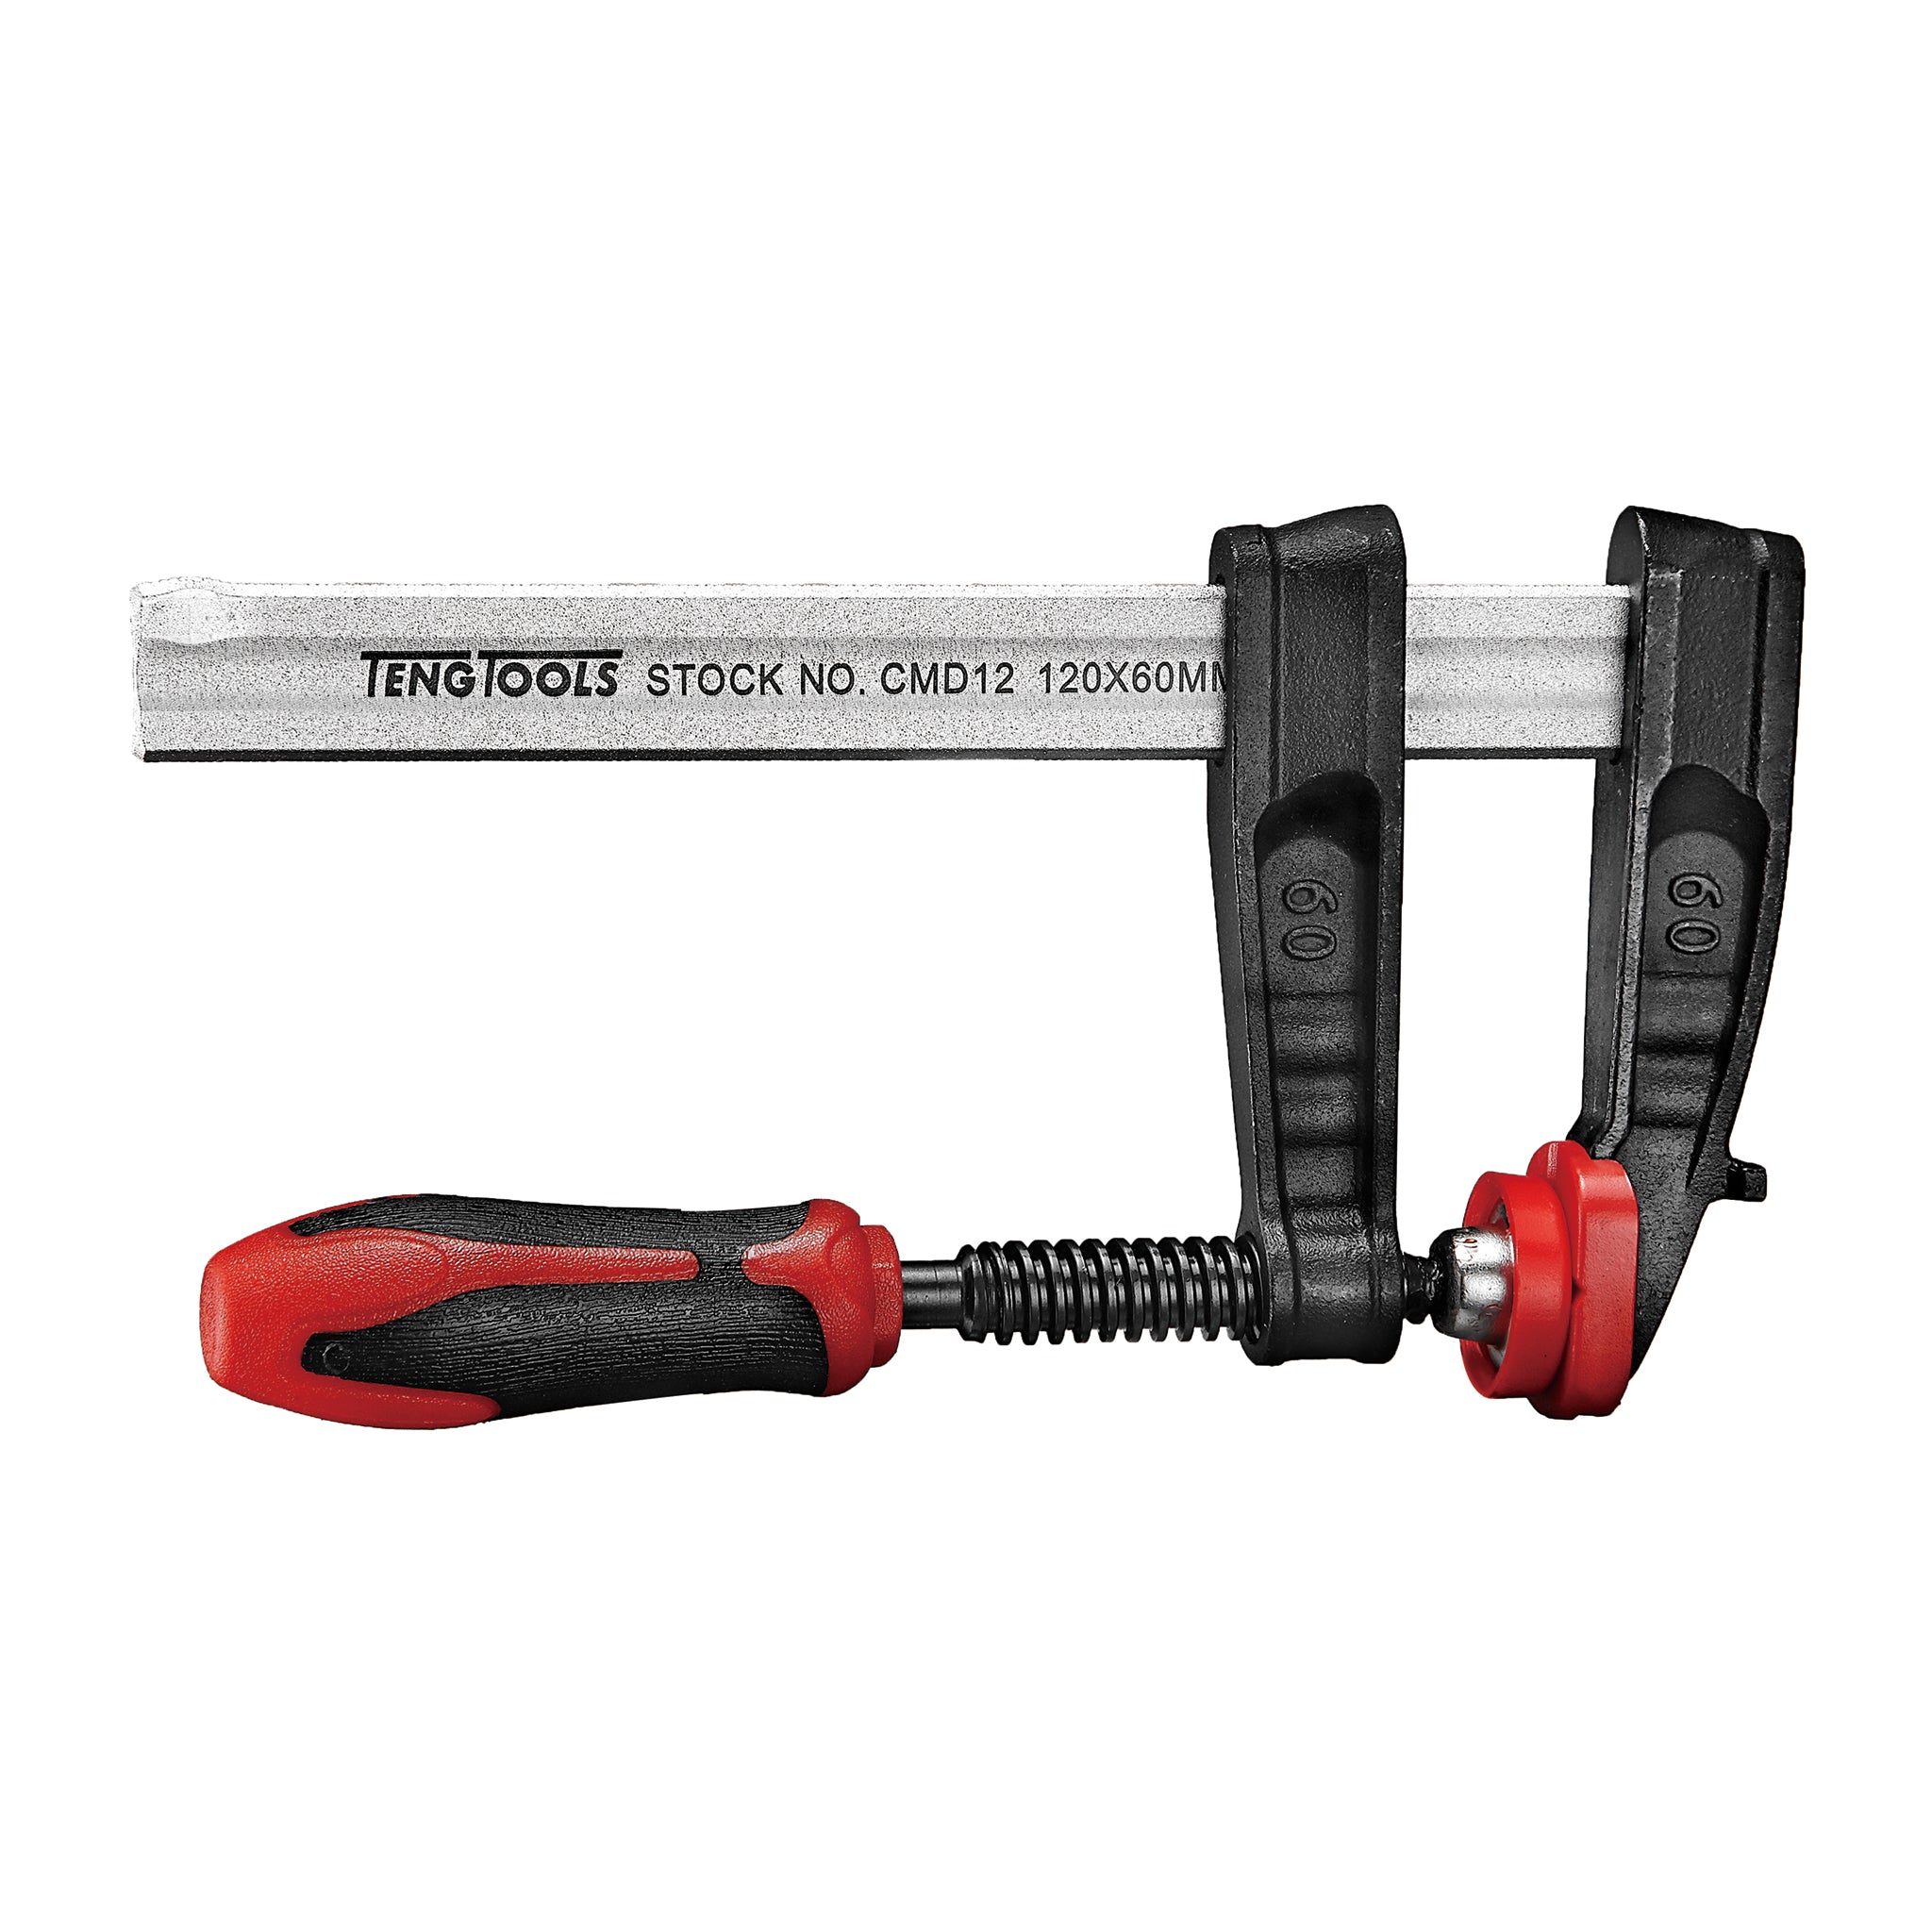 Teng Tools F-Clamps With Bi Material Handles - 500x120MM